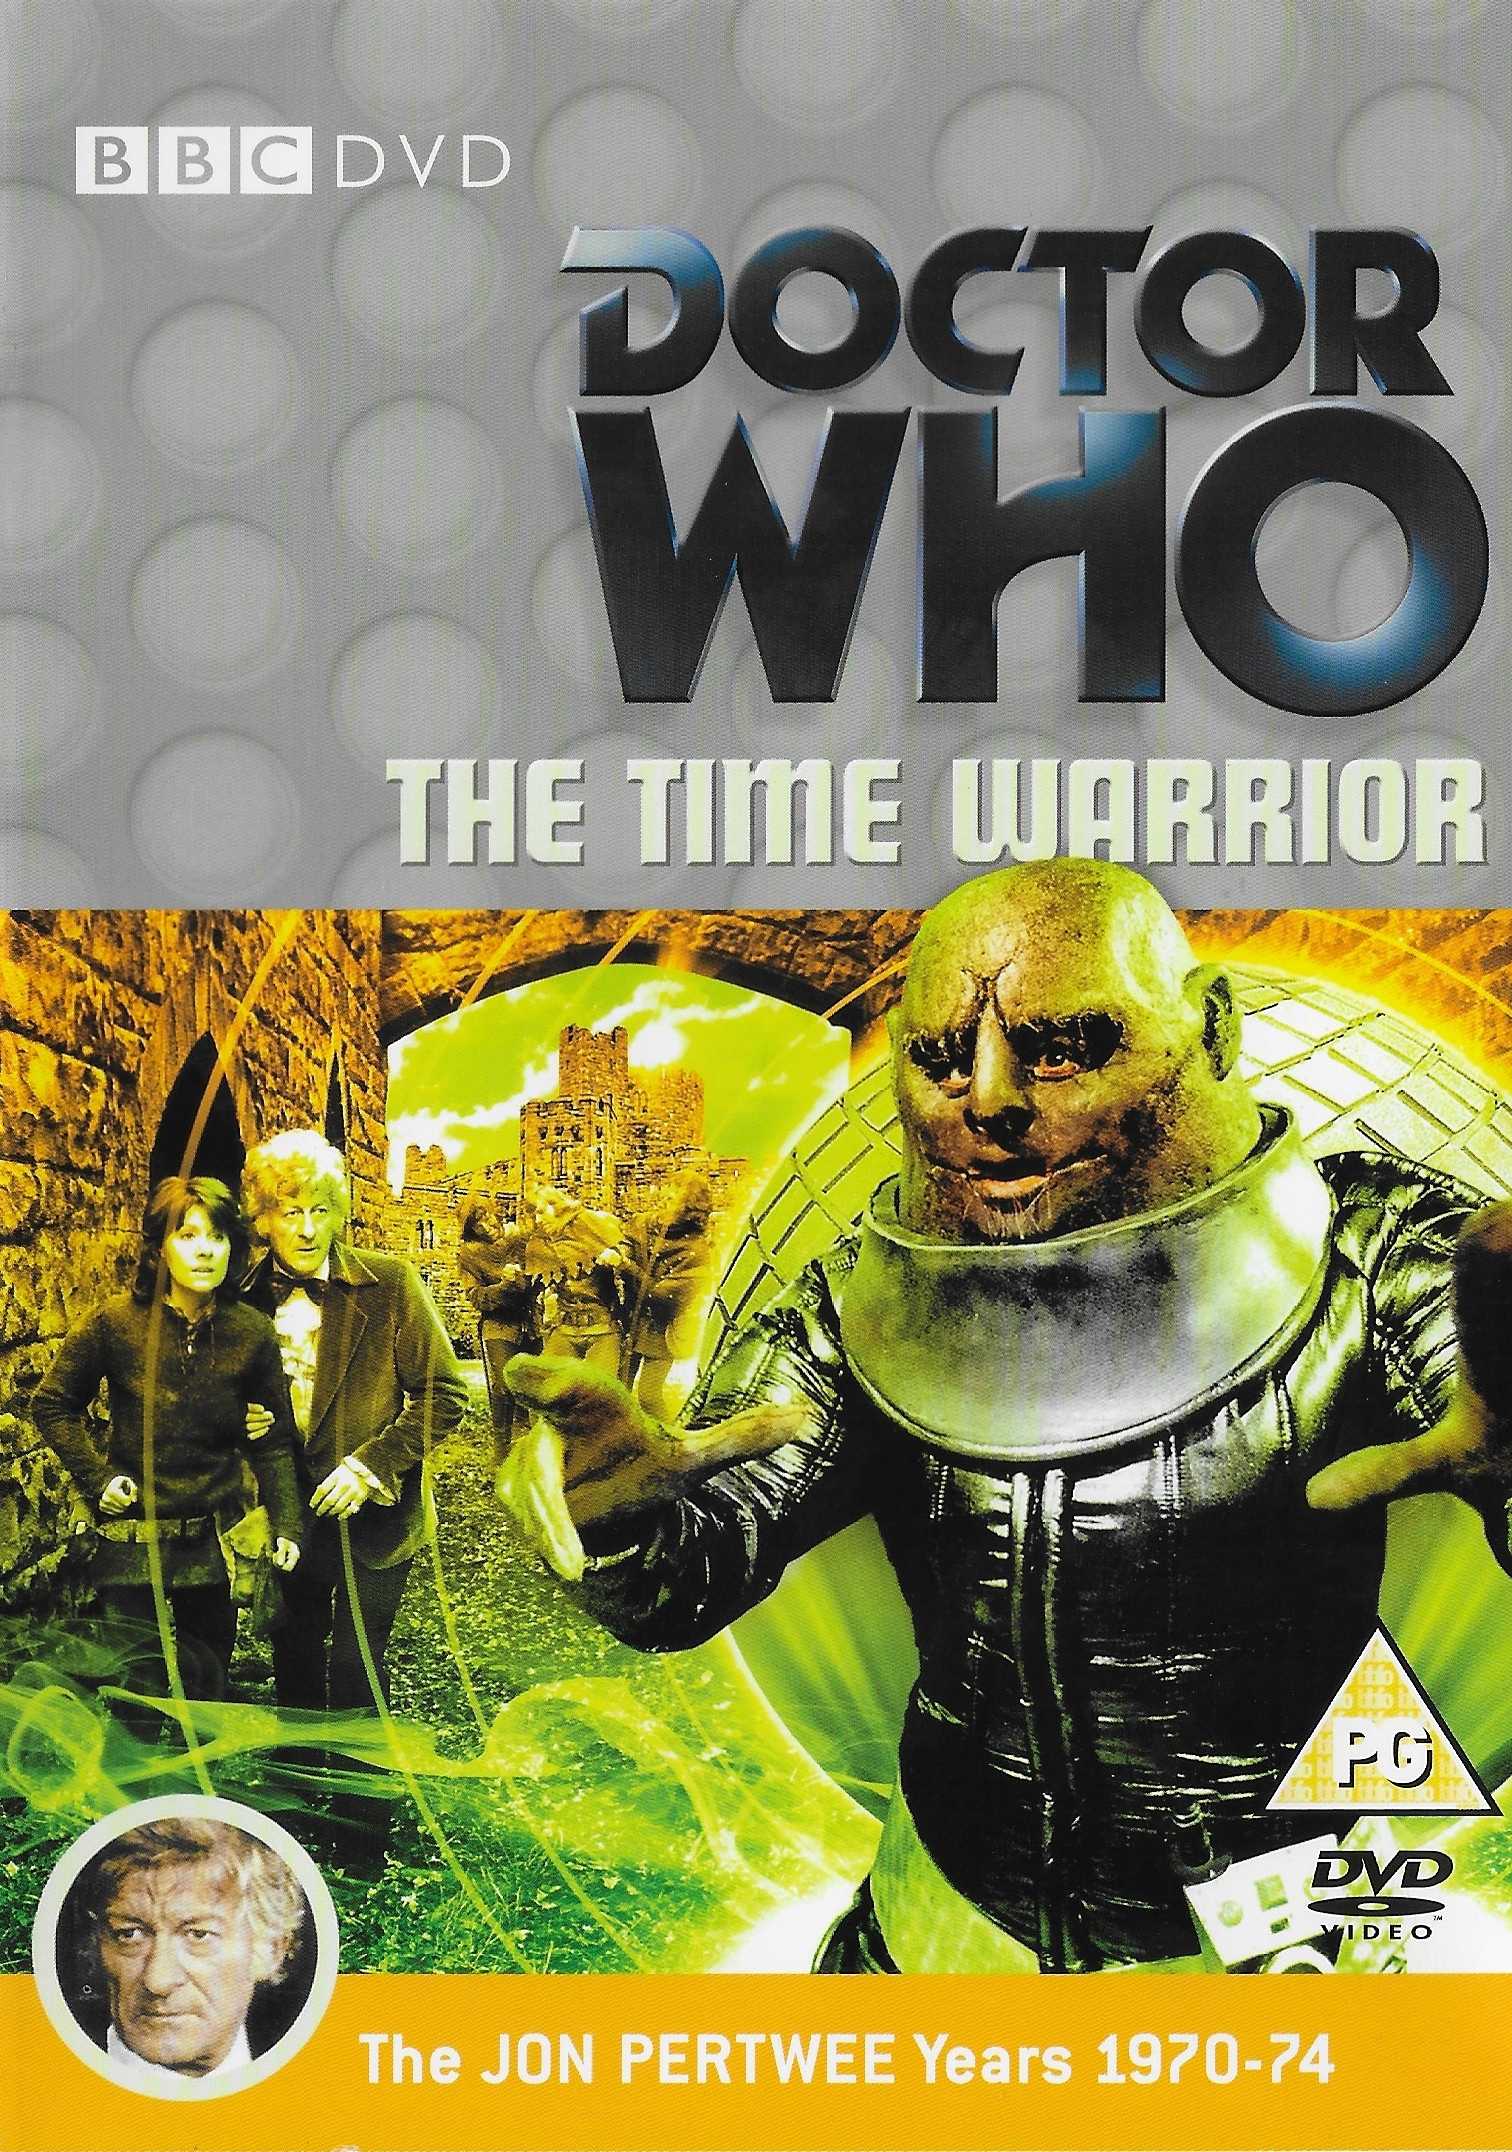 Picture of BBCDVD 2334 Doctor Who - The time warrior by artist Robert Holmes from the BBC records and Tapes library